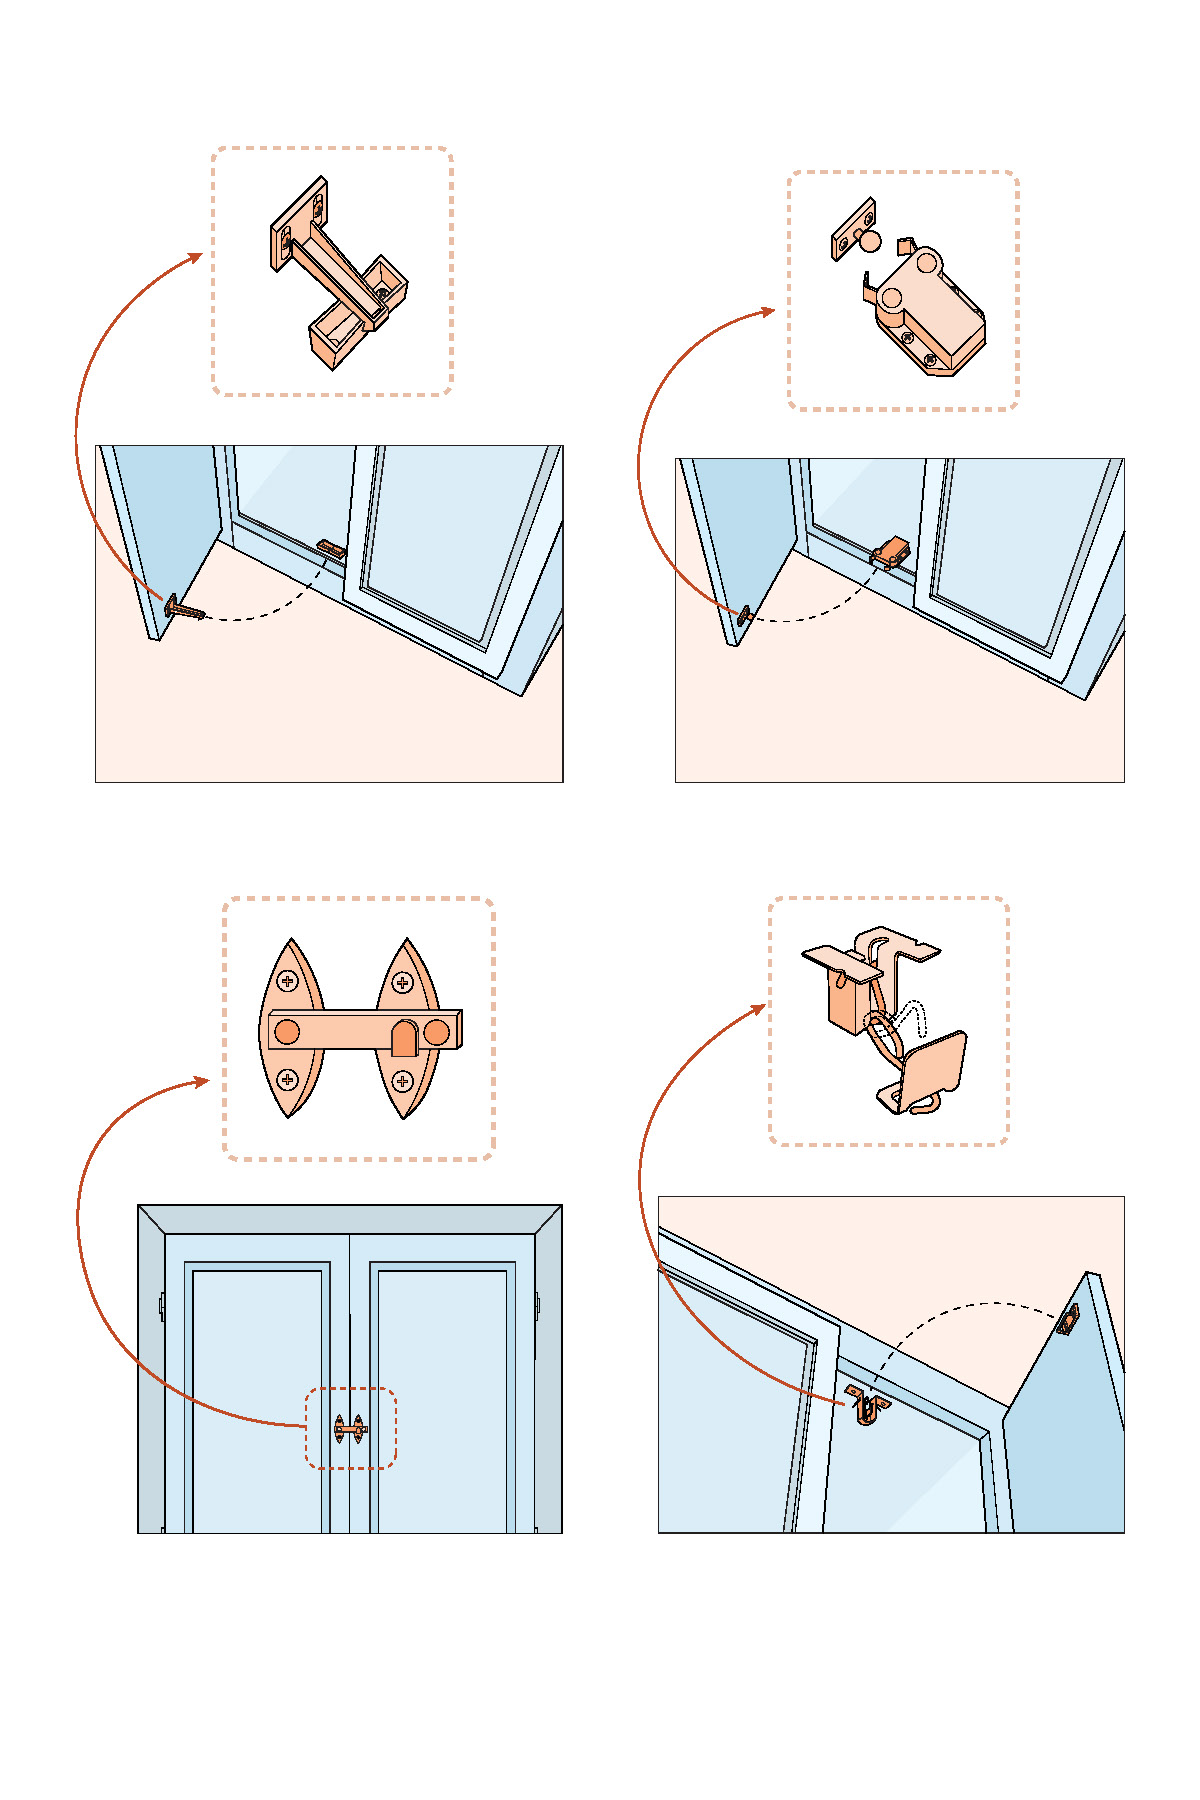 How to Baby Proof All Types of Doors